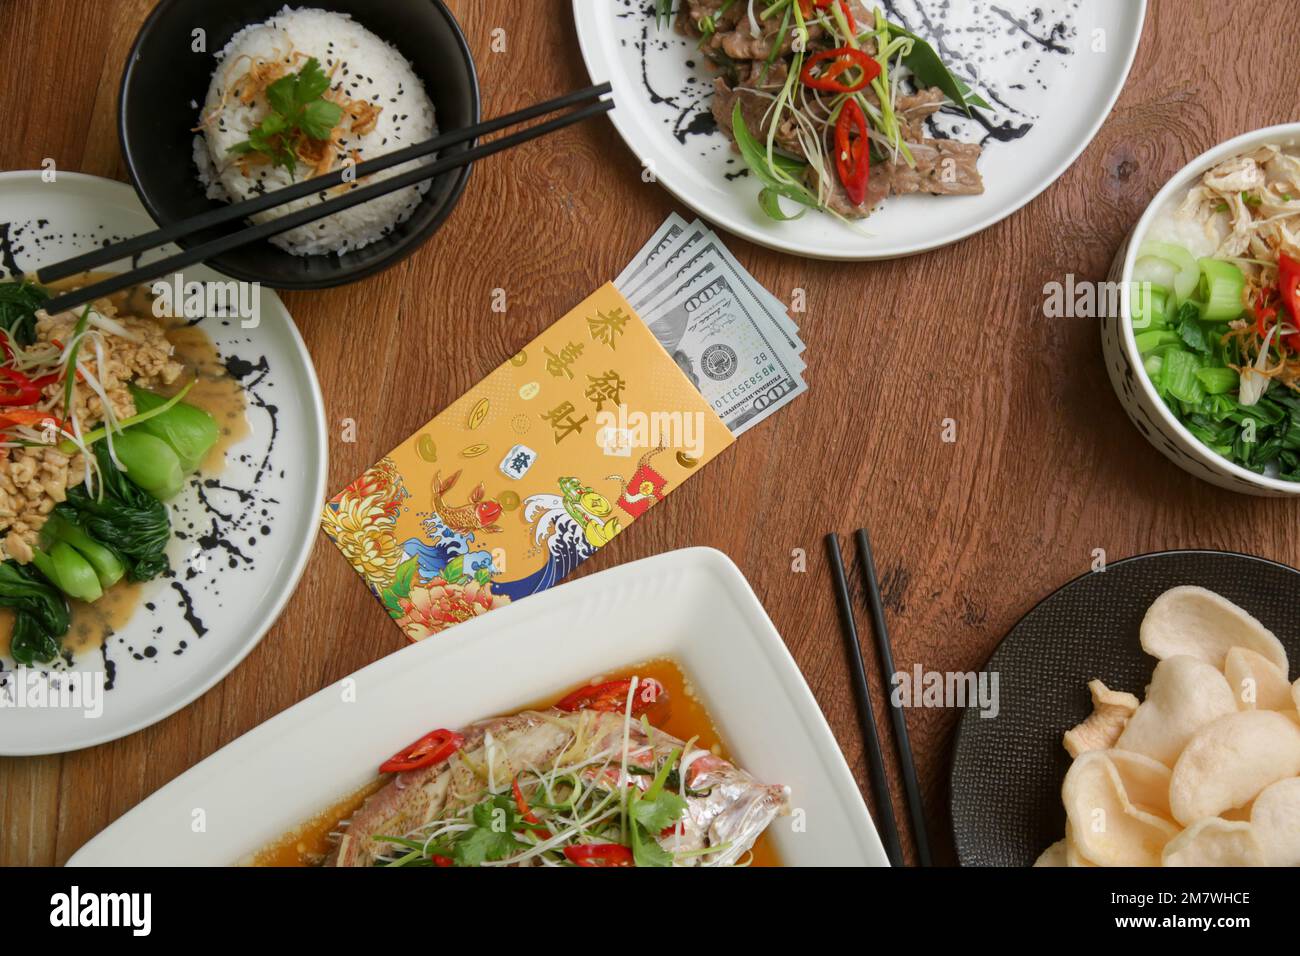 Foods to eat on Lunar New Year’s Eve on the table with golden envelope stuffed with money as a token of good fortune in the New Year. Stock Photo